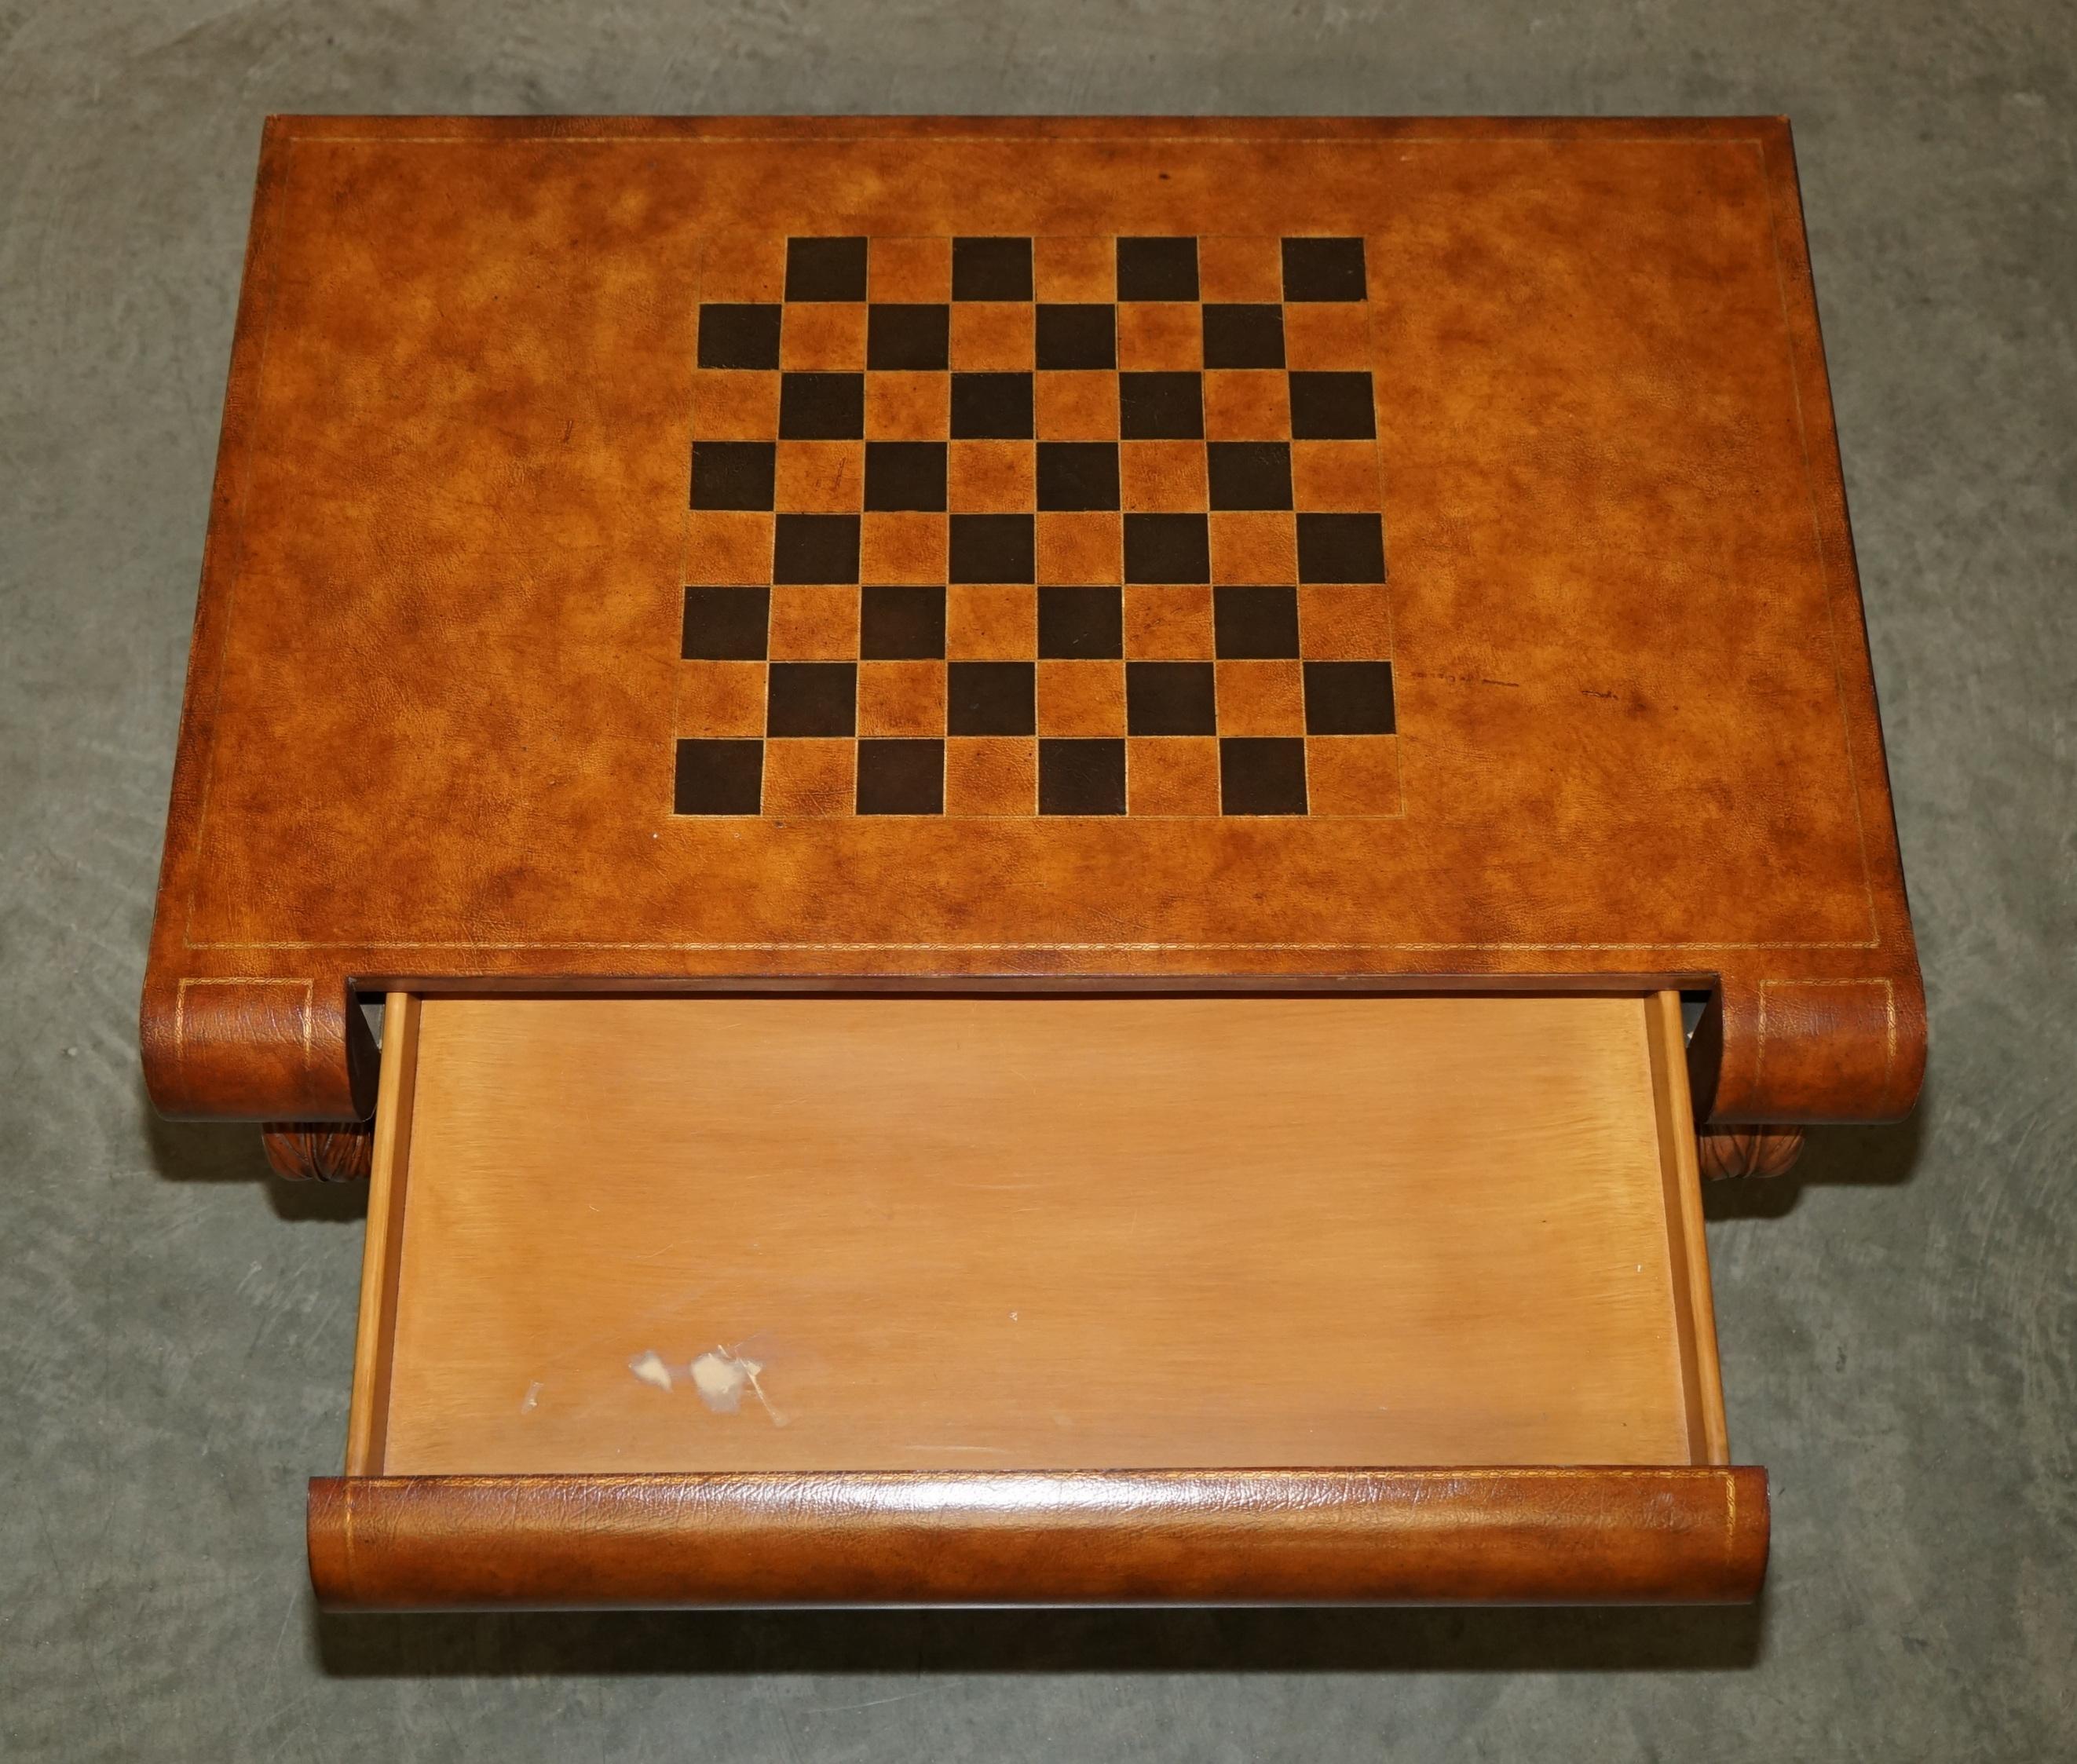 STUNNiNG HANDDYED BROWN LEATHER SCHOLARS BOOK CHESSBOARD CHESS COFFEE TABLE im Angebot 9